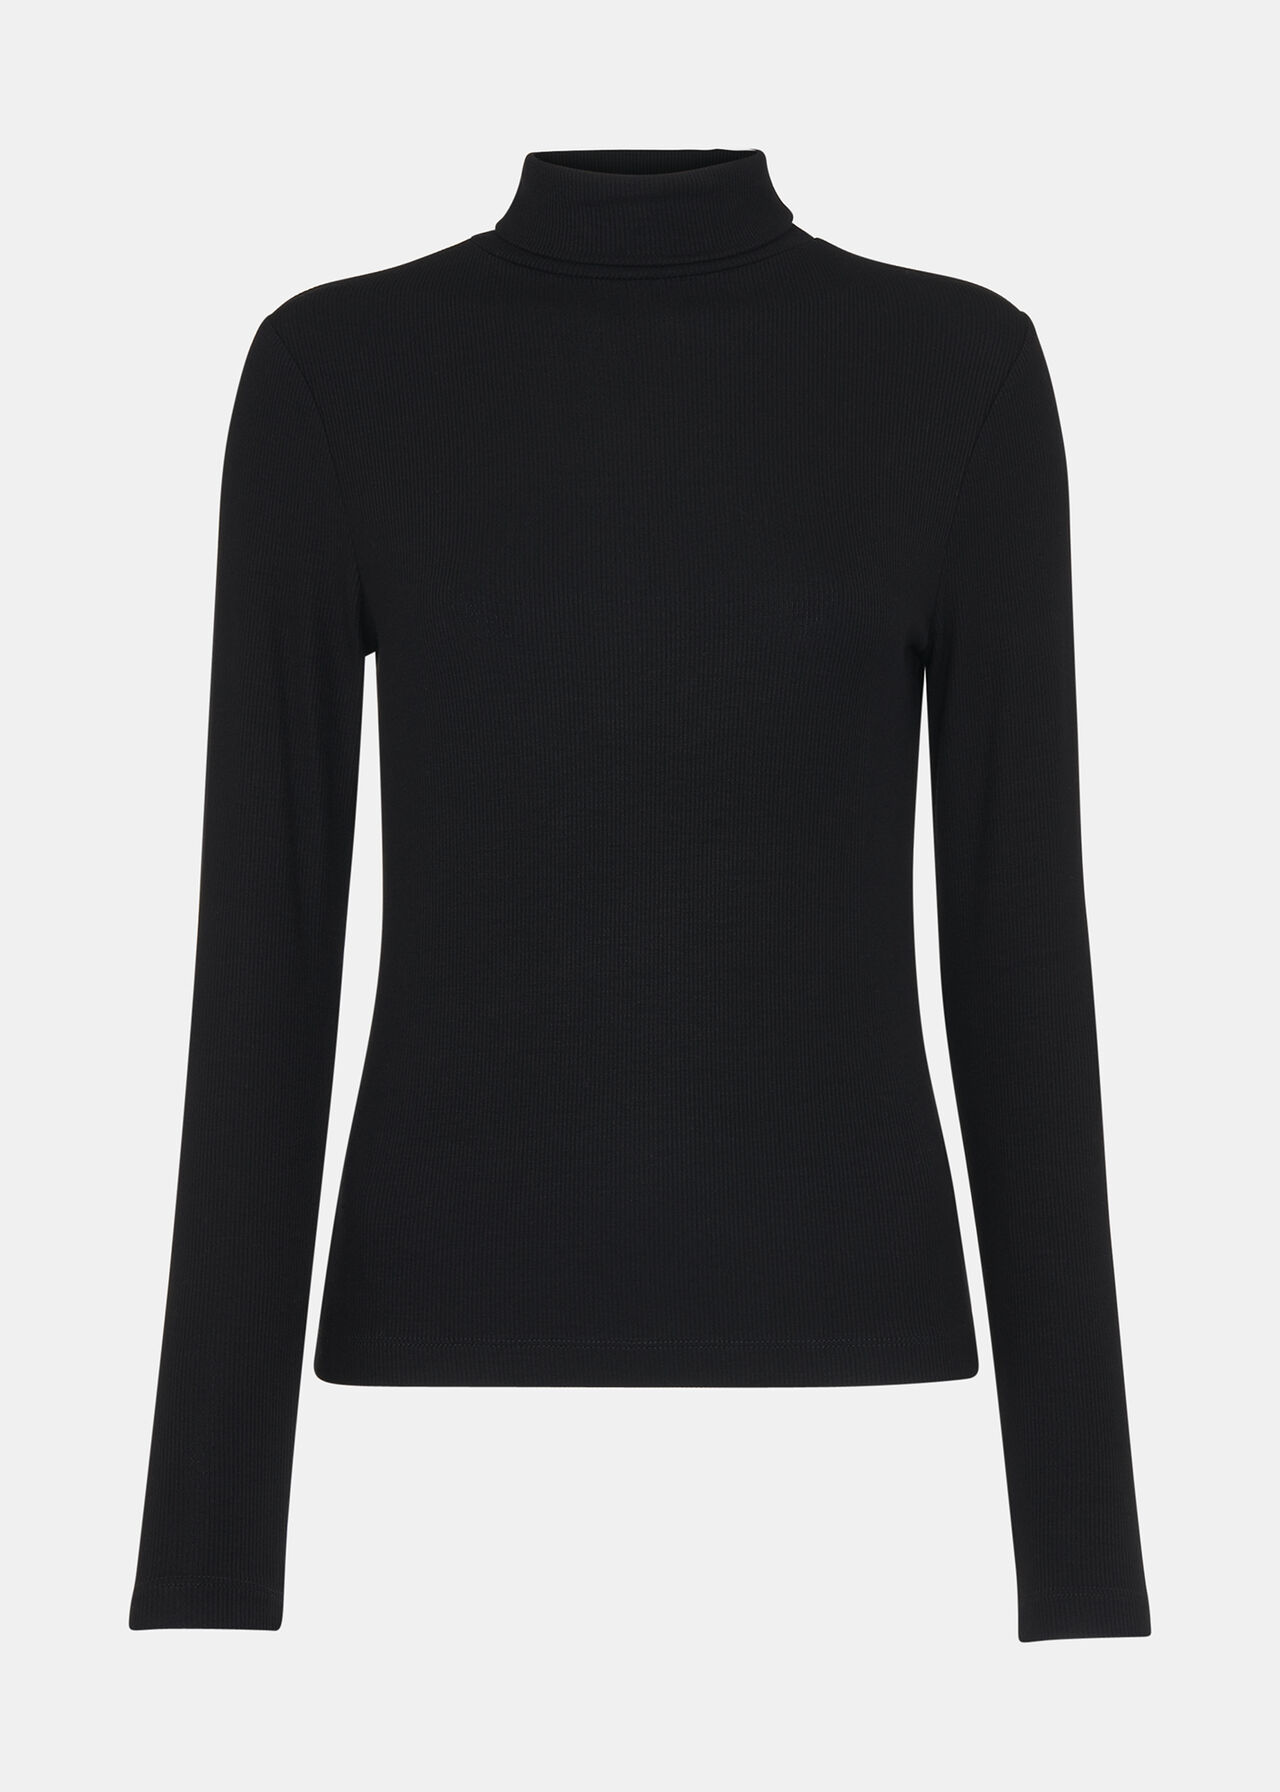 Shop the Black Ribbed Roll Neck Top at Whistles, Week Day Essential